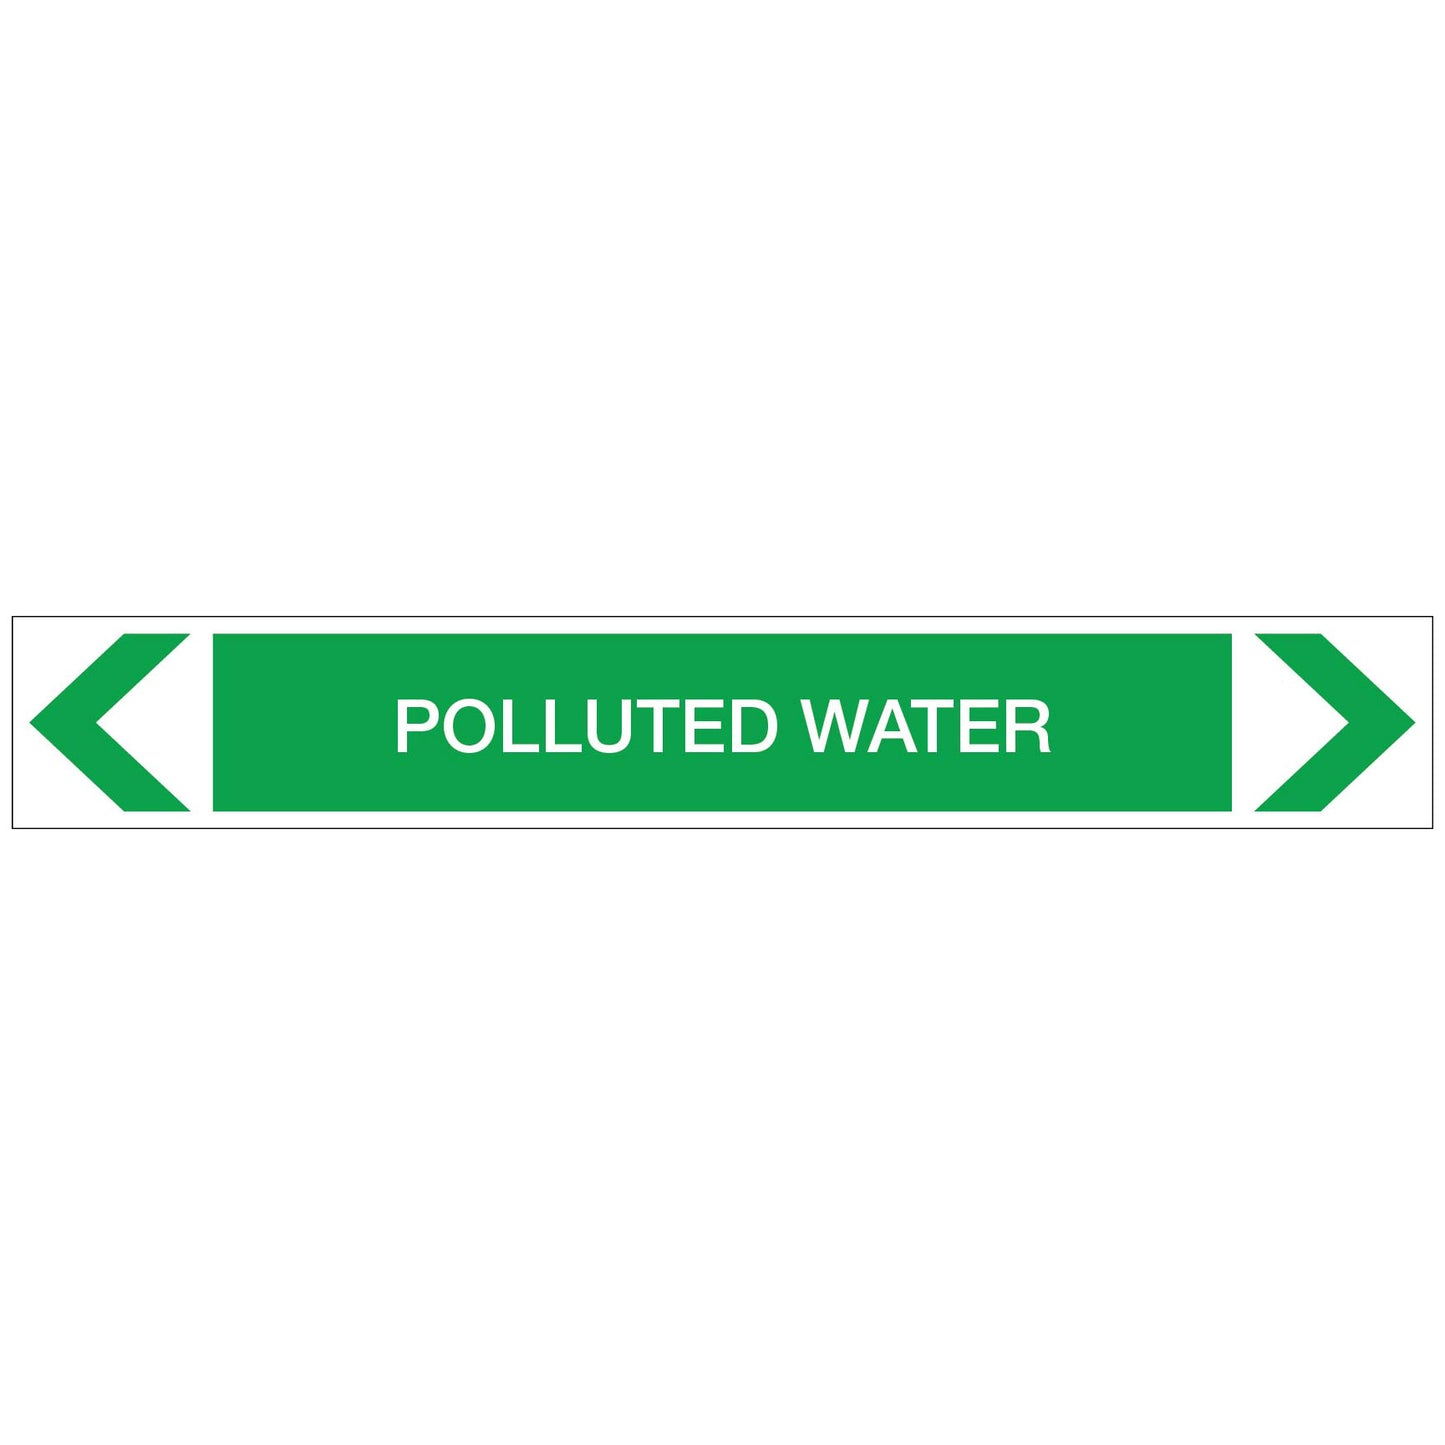 Water - Polluted Water - Pipe Marker Sticker